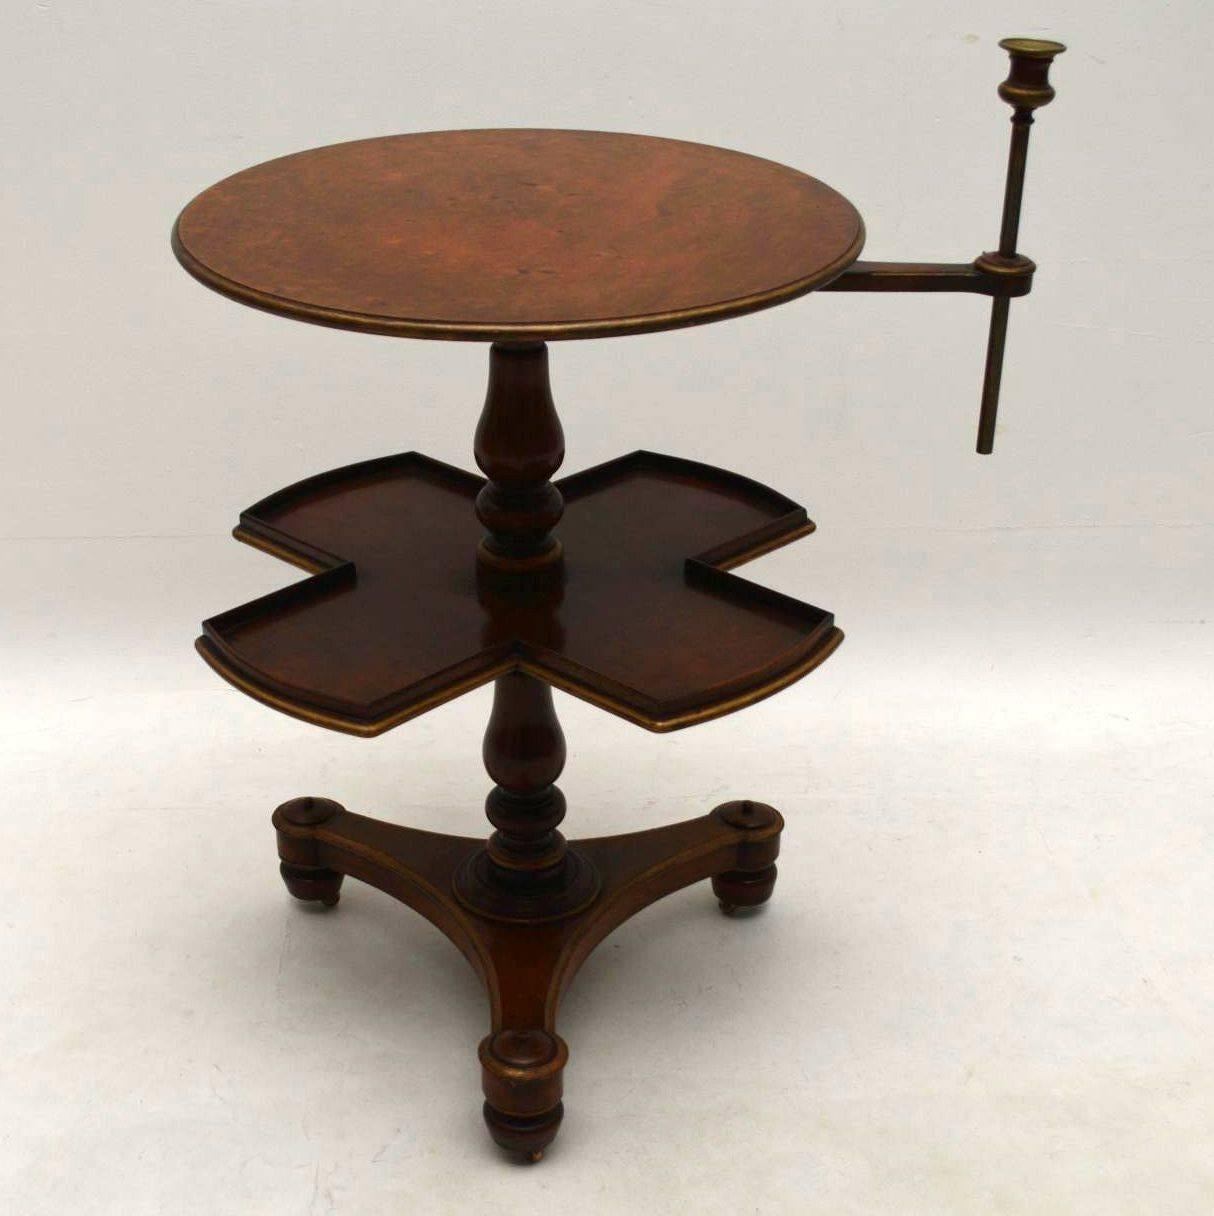 Very unusual antique multifunctional occasional table in walnut with a rotating section below the round top. It dates to around the 1840s period and is in excellent original condition. It has a platform base with casters underneath. The is a gilt